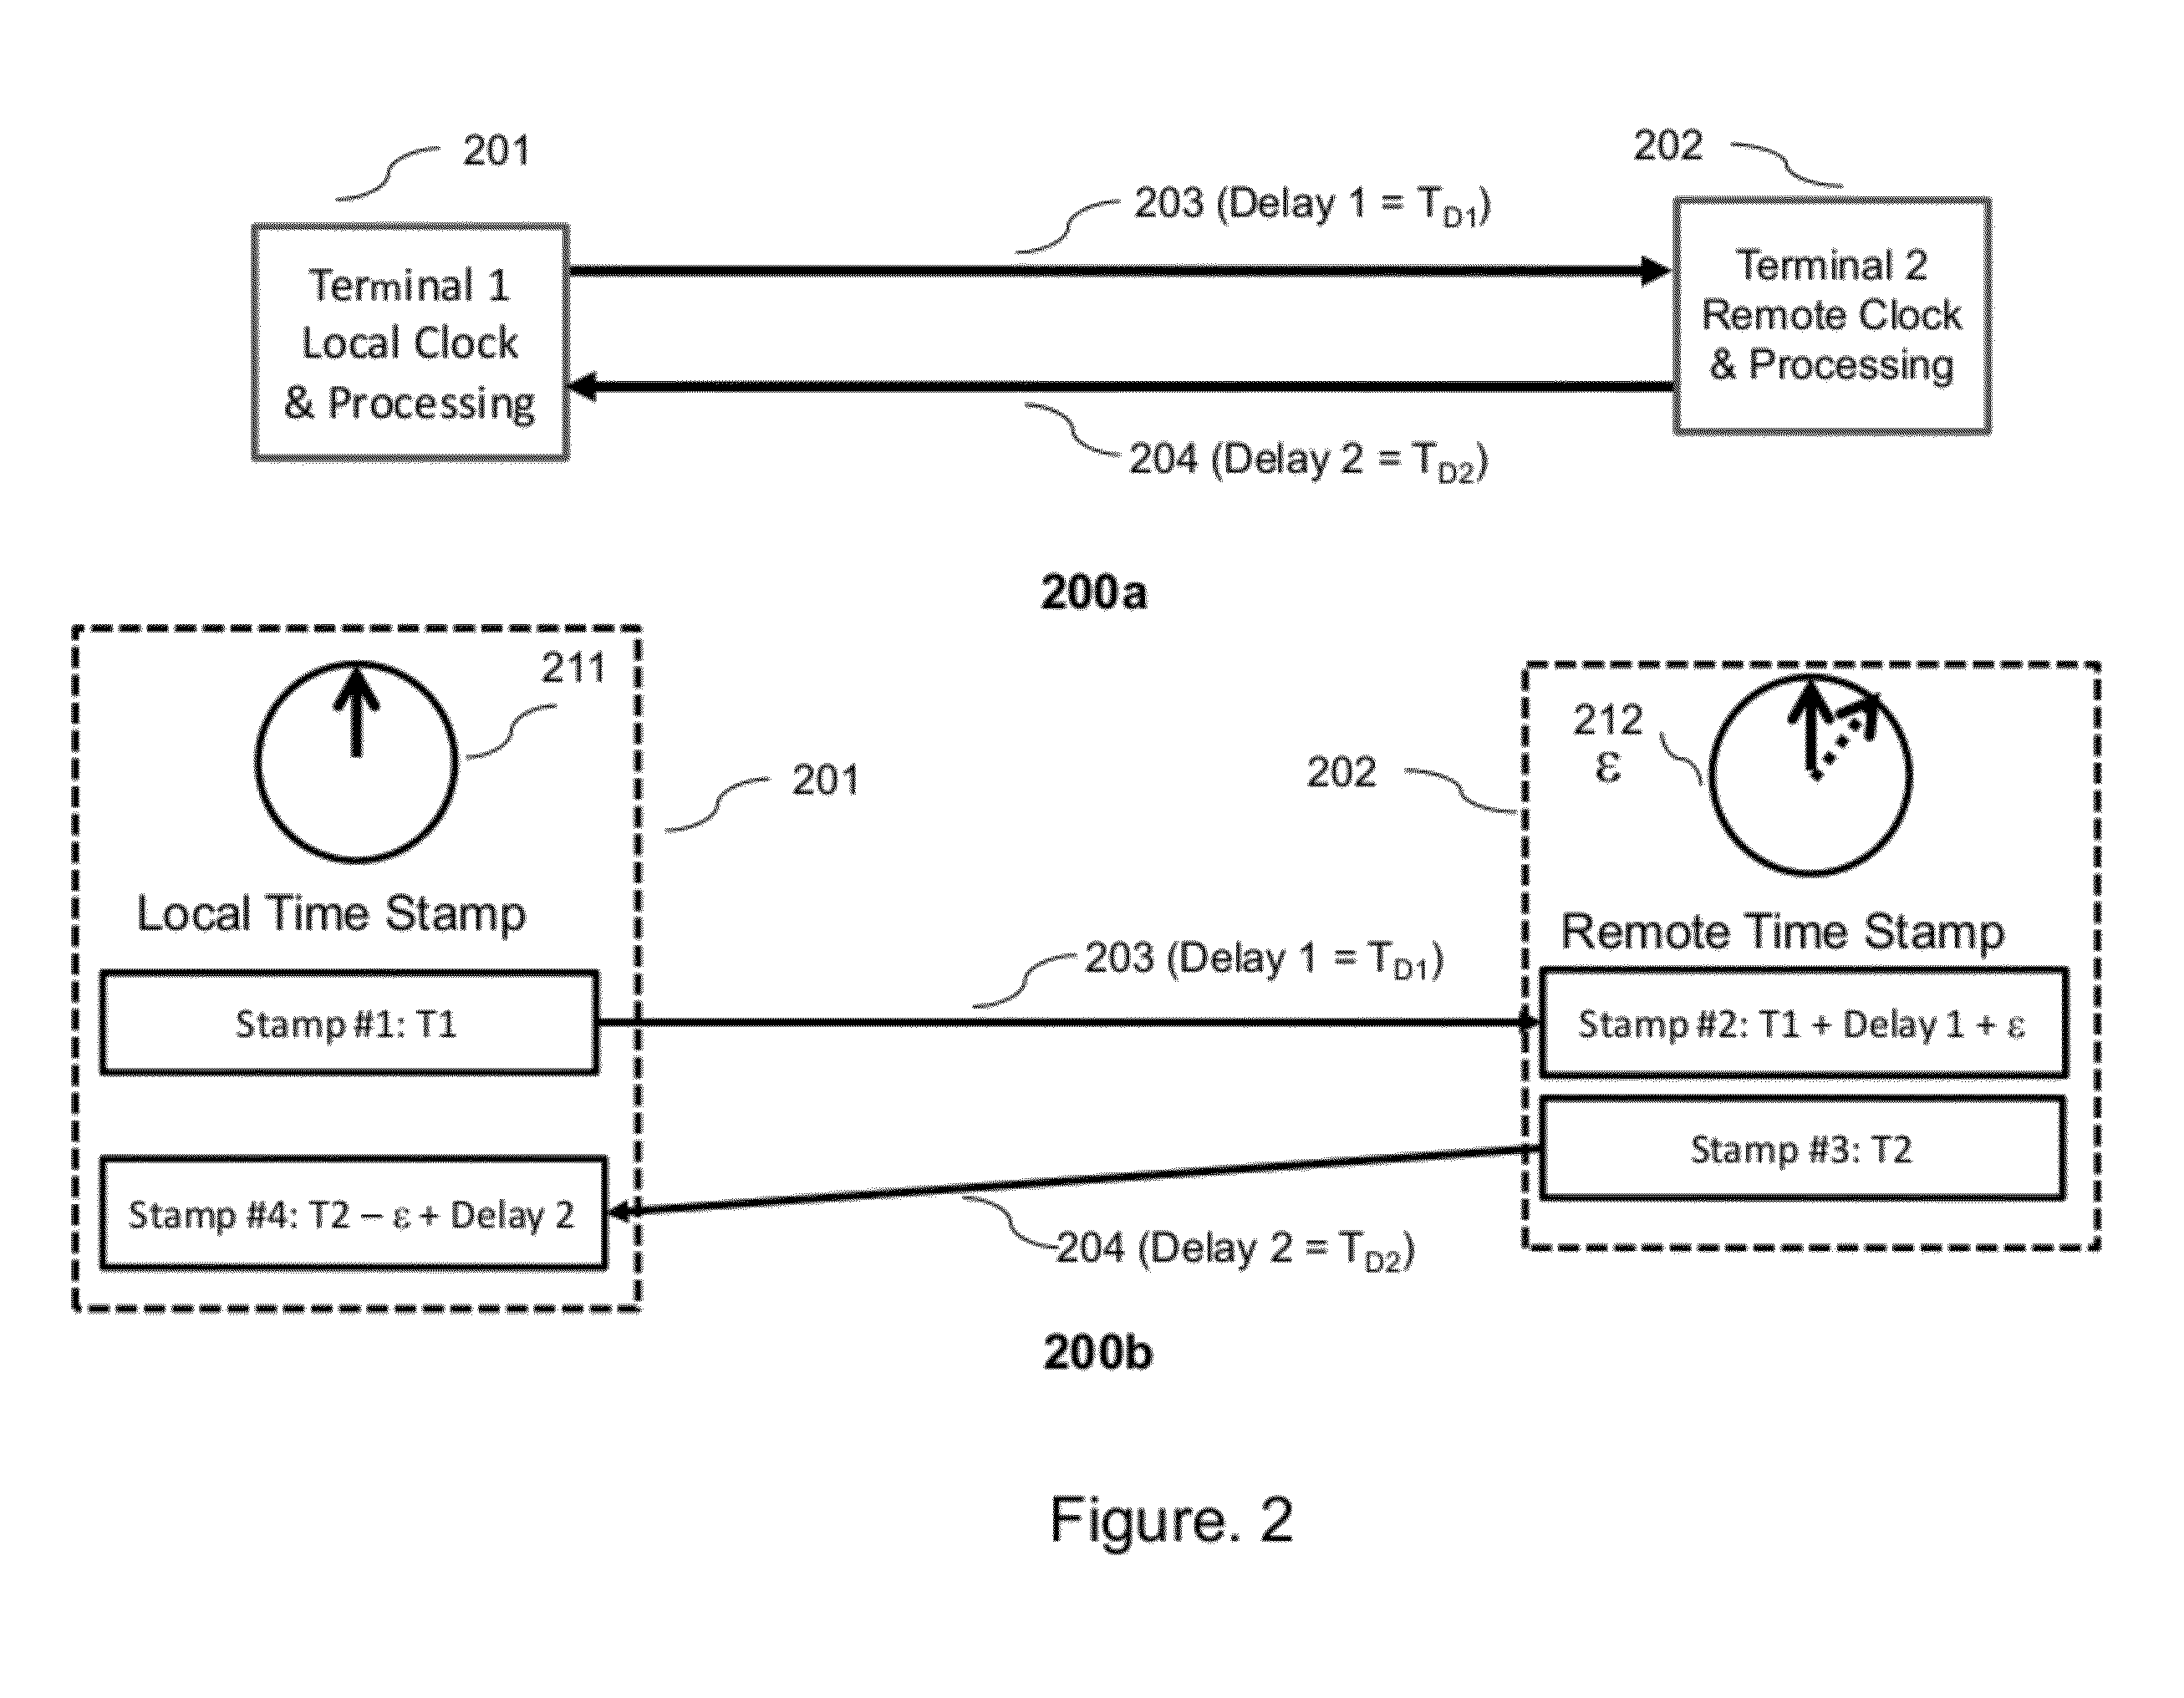 Fault Localization and Fiber Security in Optical Transponders